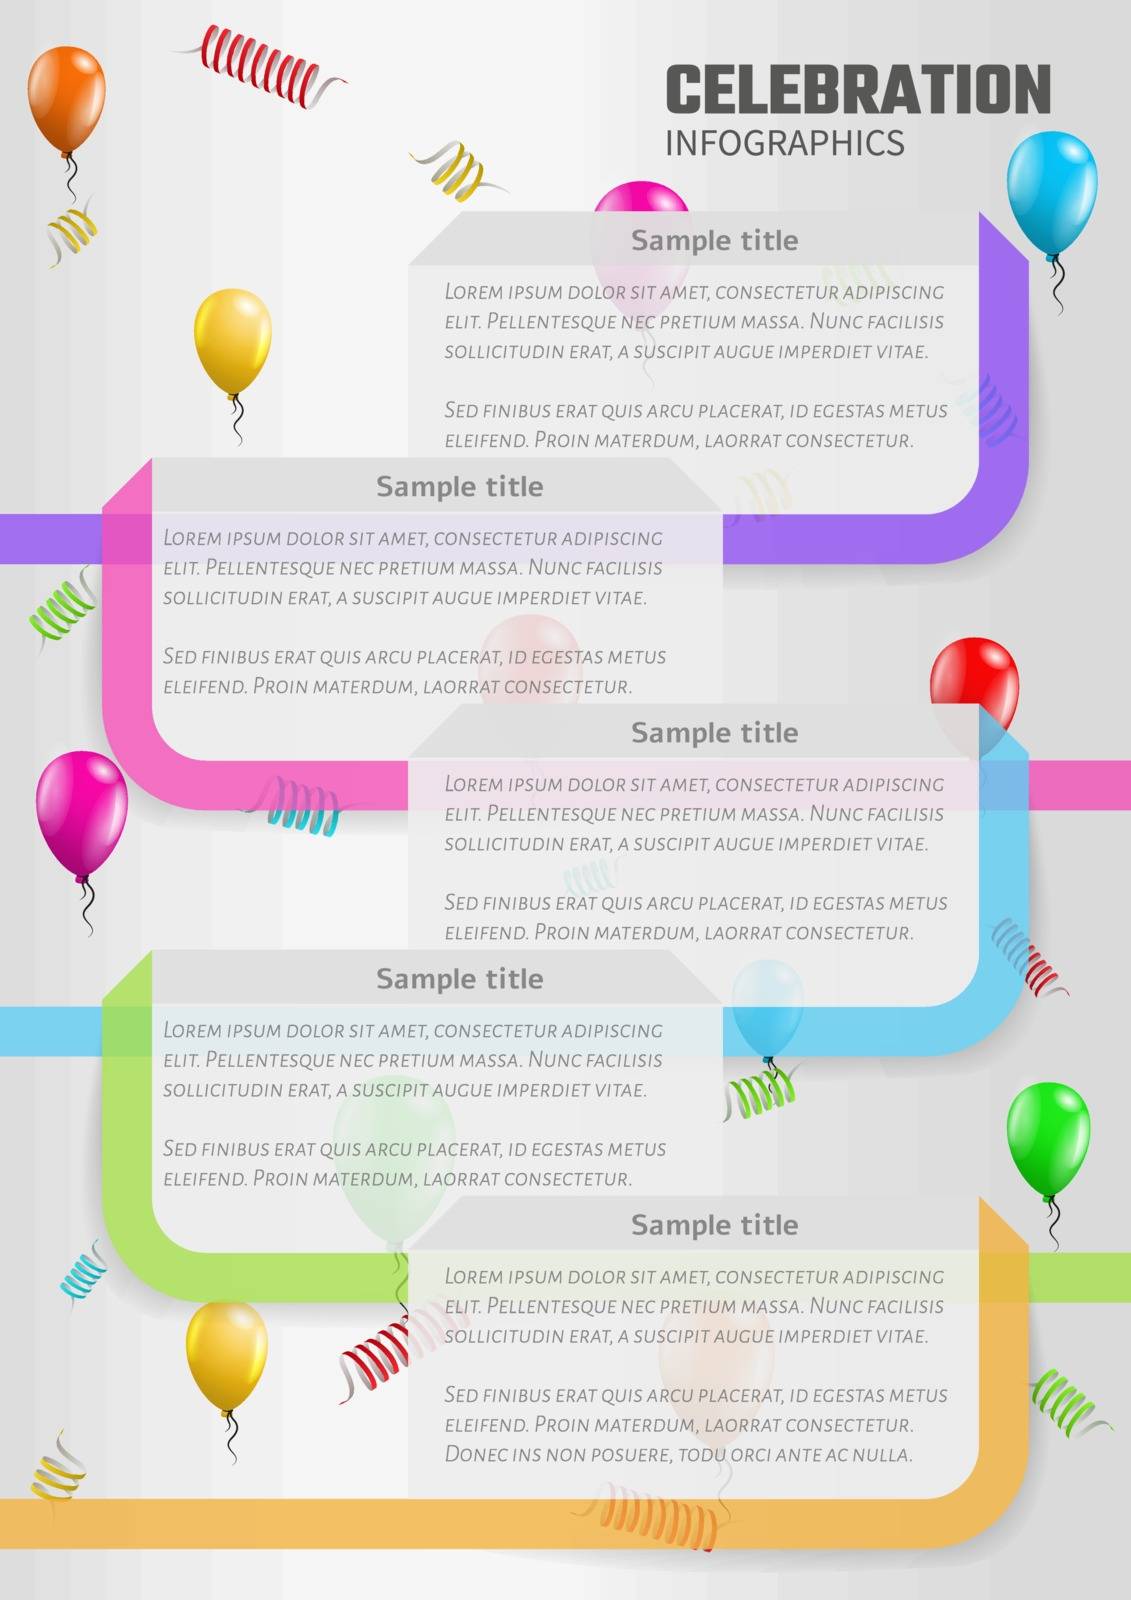 celebration infographics with balloons by muuraa